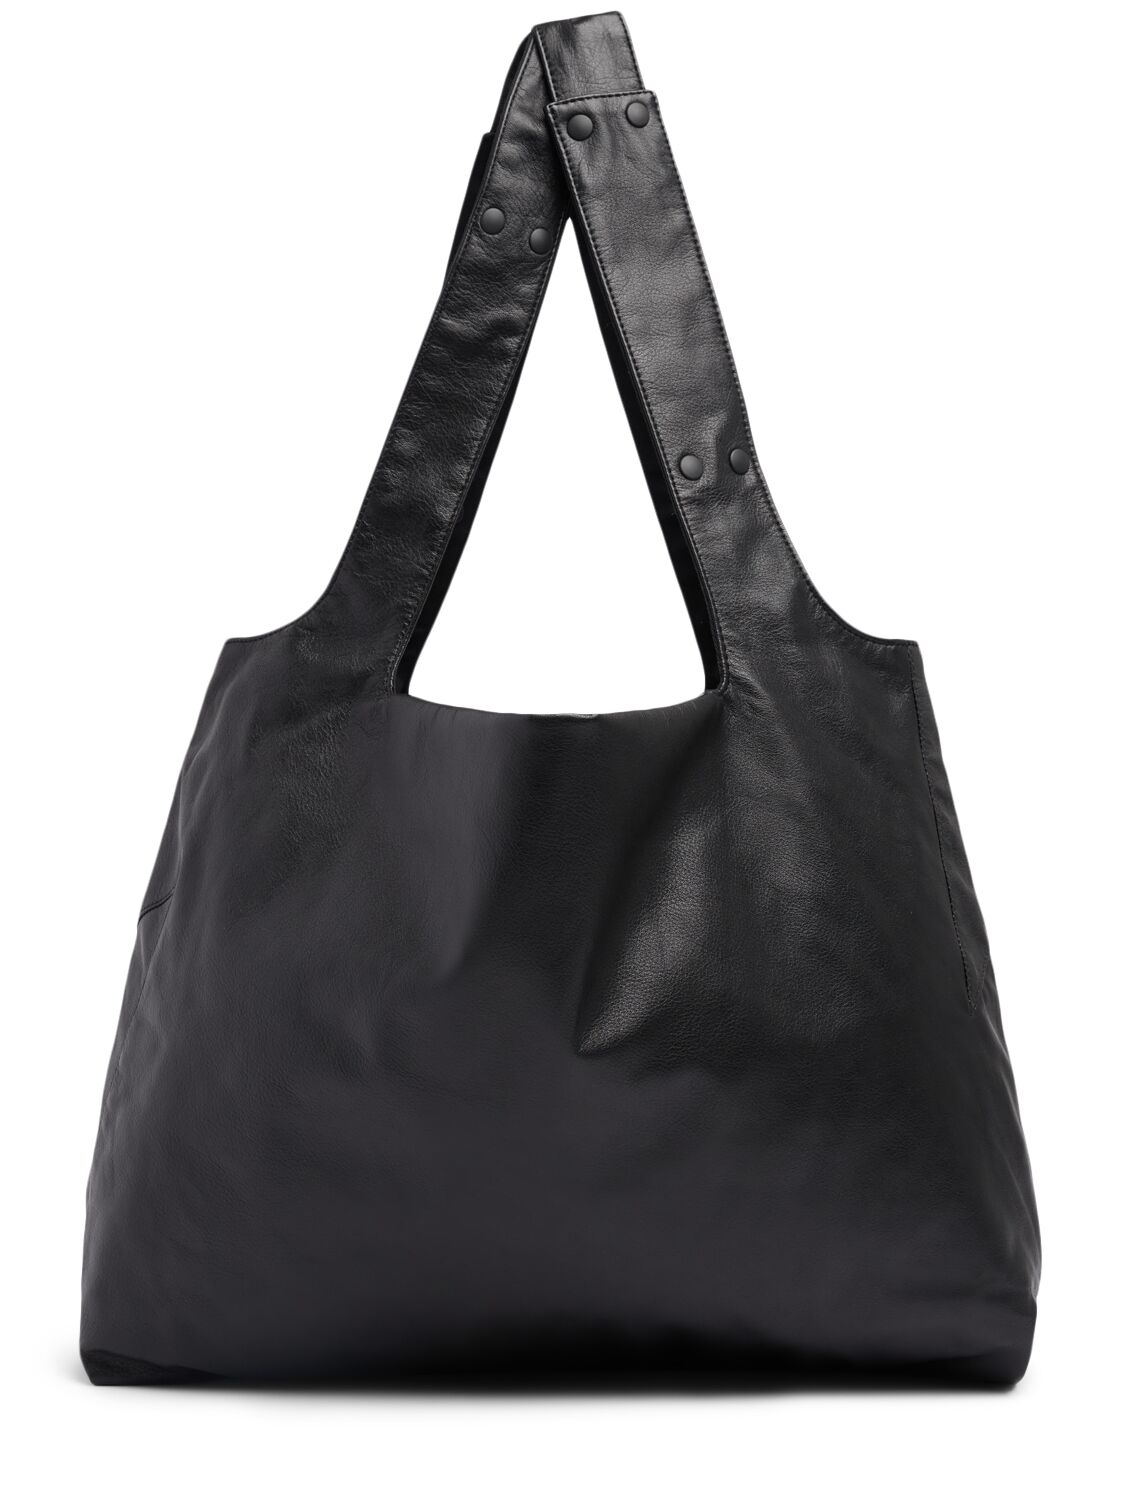 Reversible Leather Tote Bag